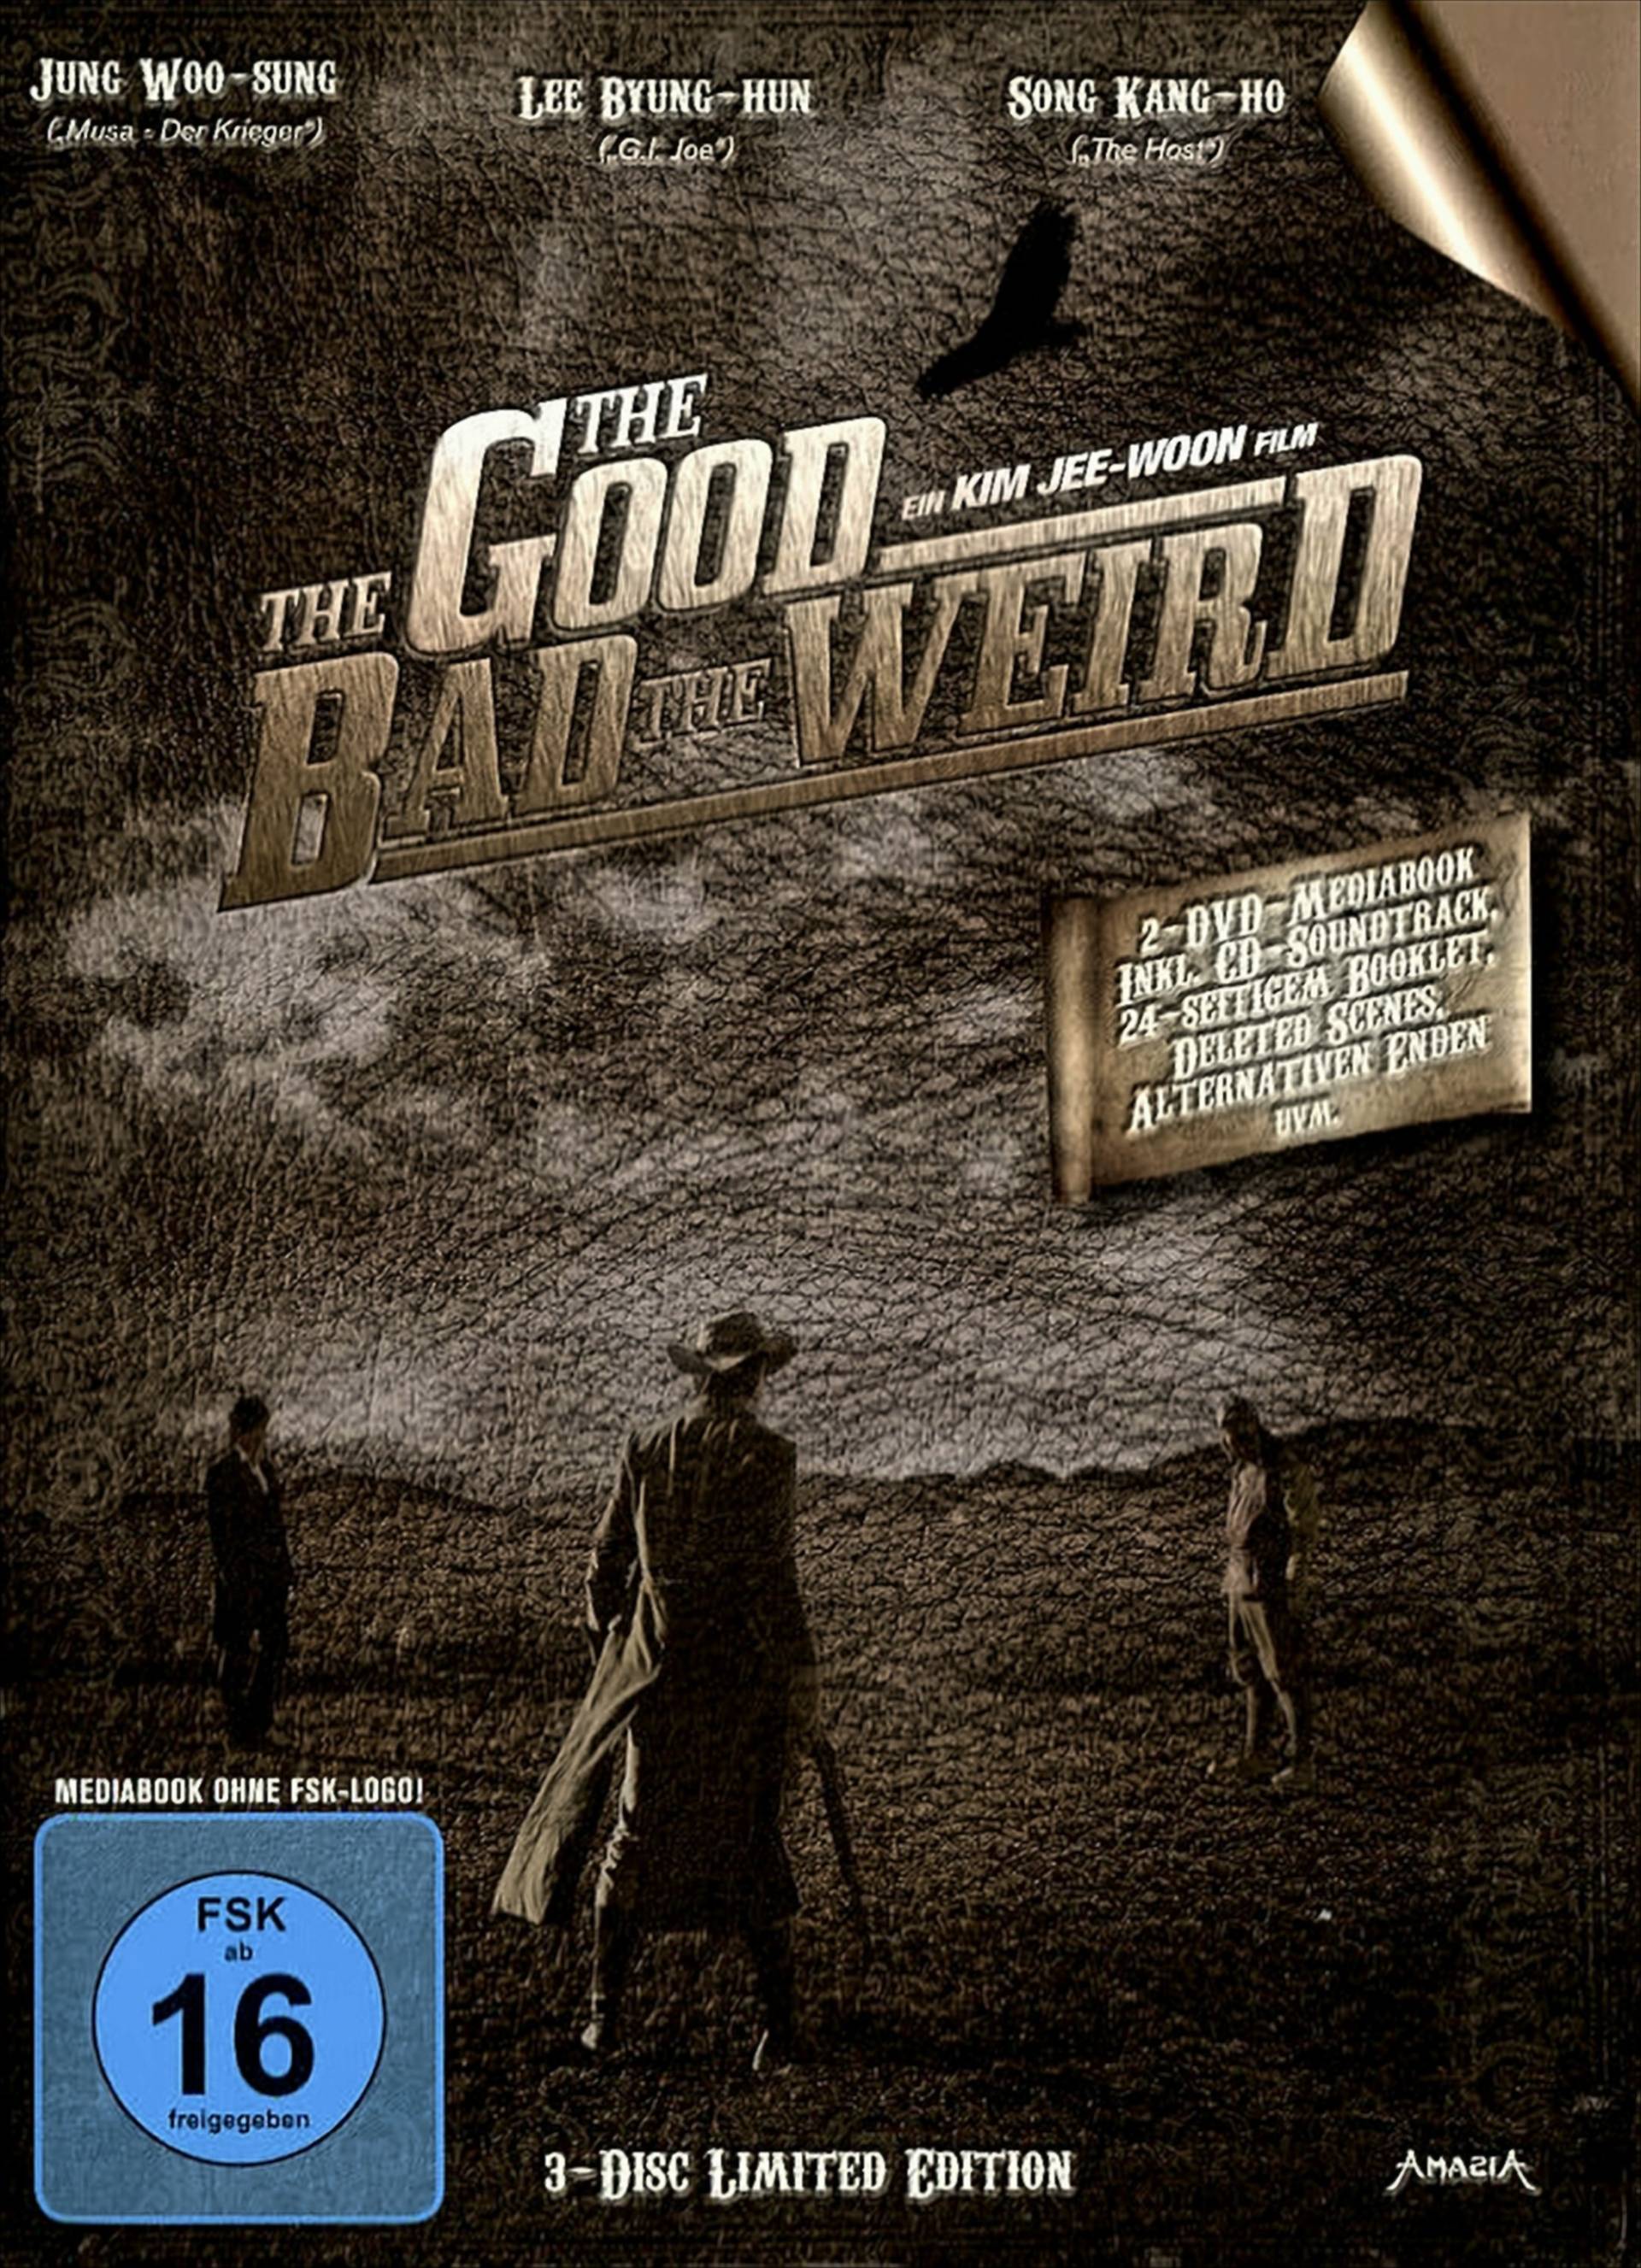 The Good, the Bad, the Weird Limited Edition, 2 DVDs + Audio-CD, Mediabook von WVG Medien